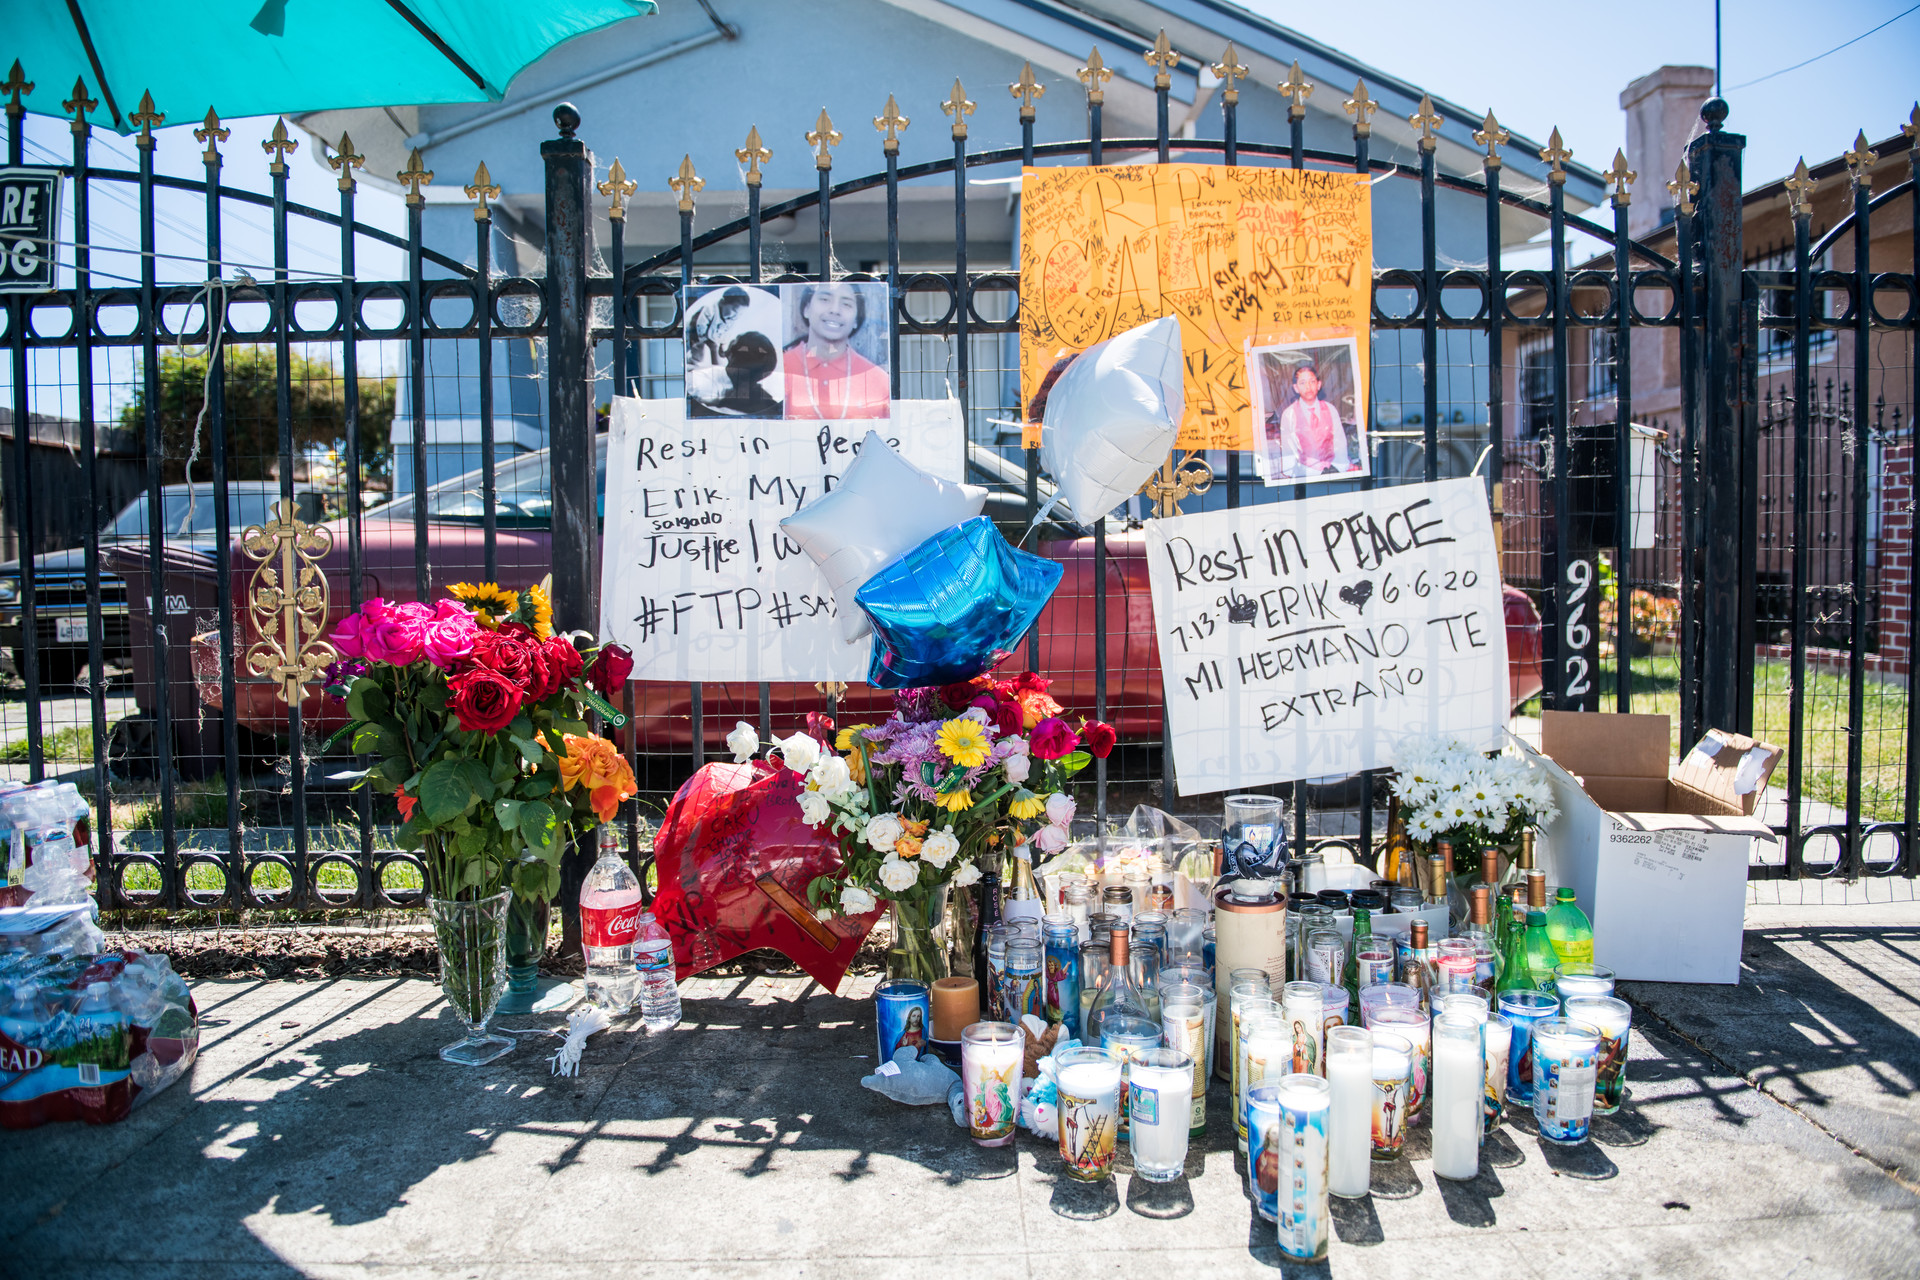 Mourners contributed to a memorial for Erik Salgado in East Oakland on June 8. Salgado was shot and killed by California Highway Patrol officers on Saturday June 6.